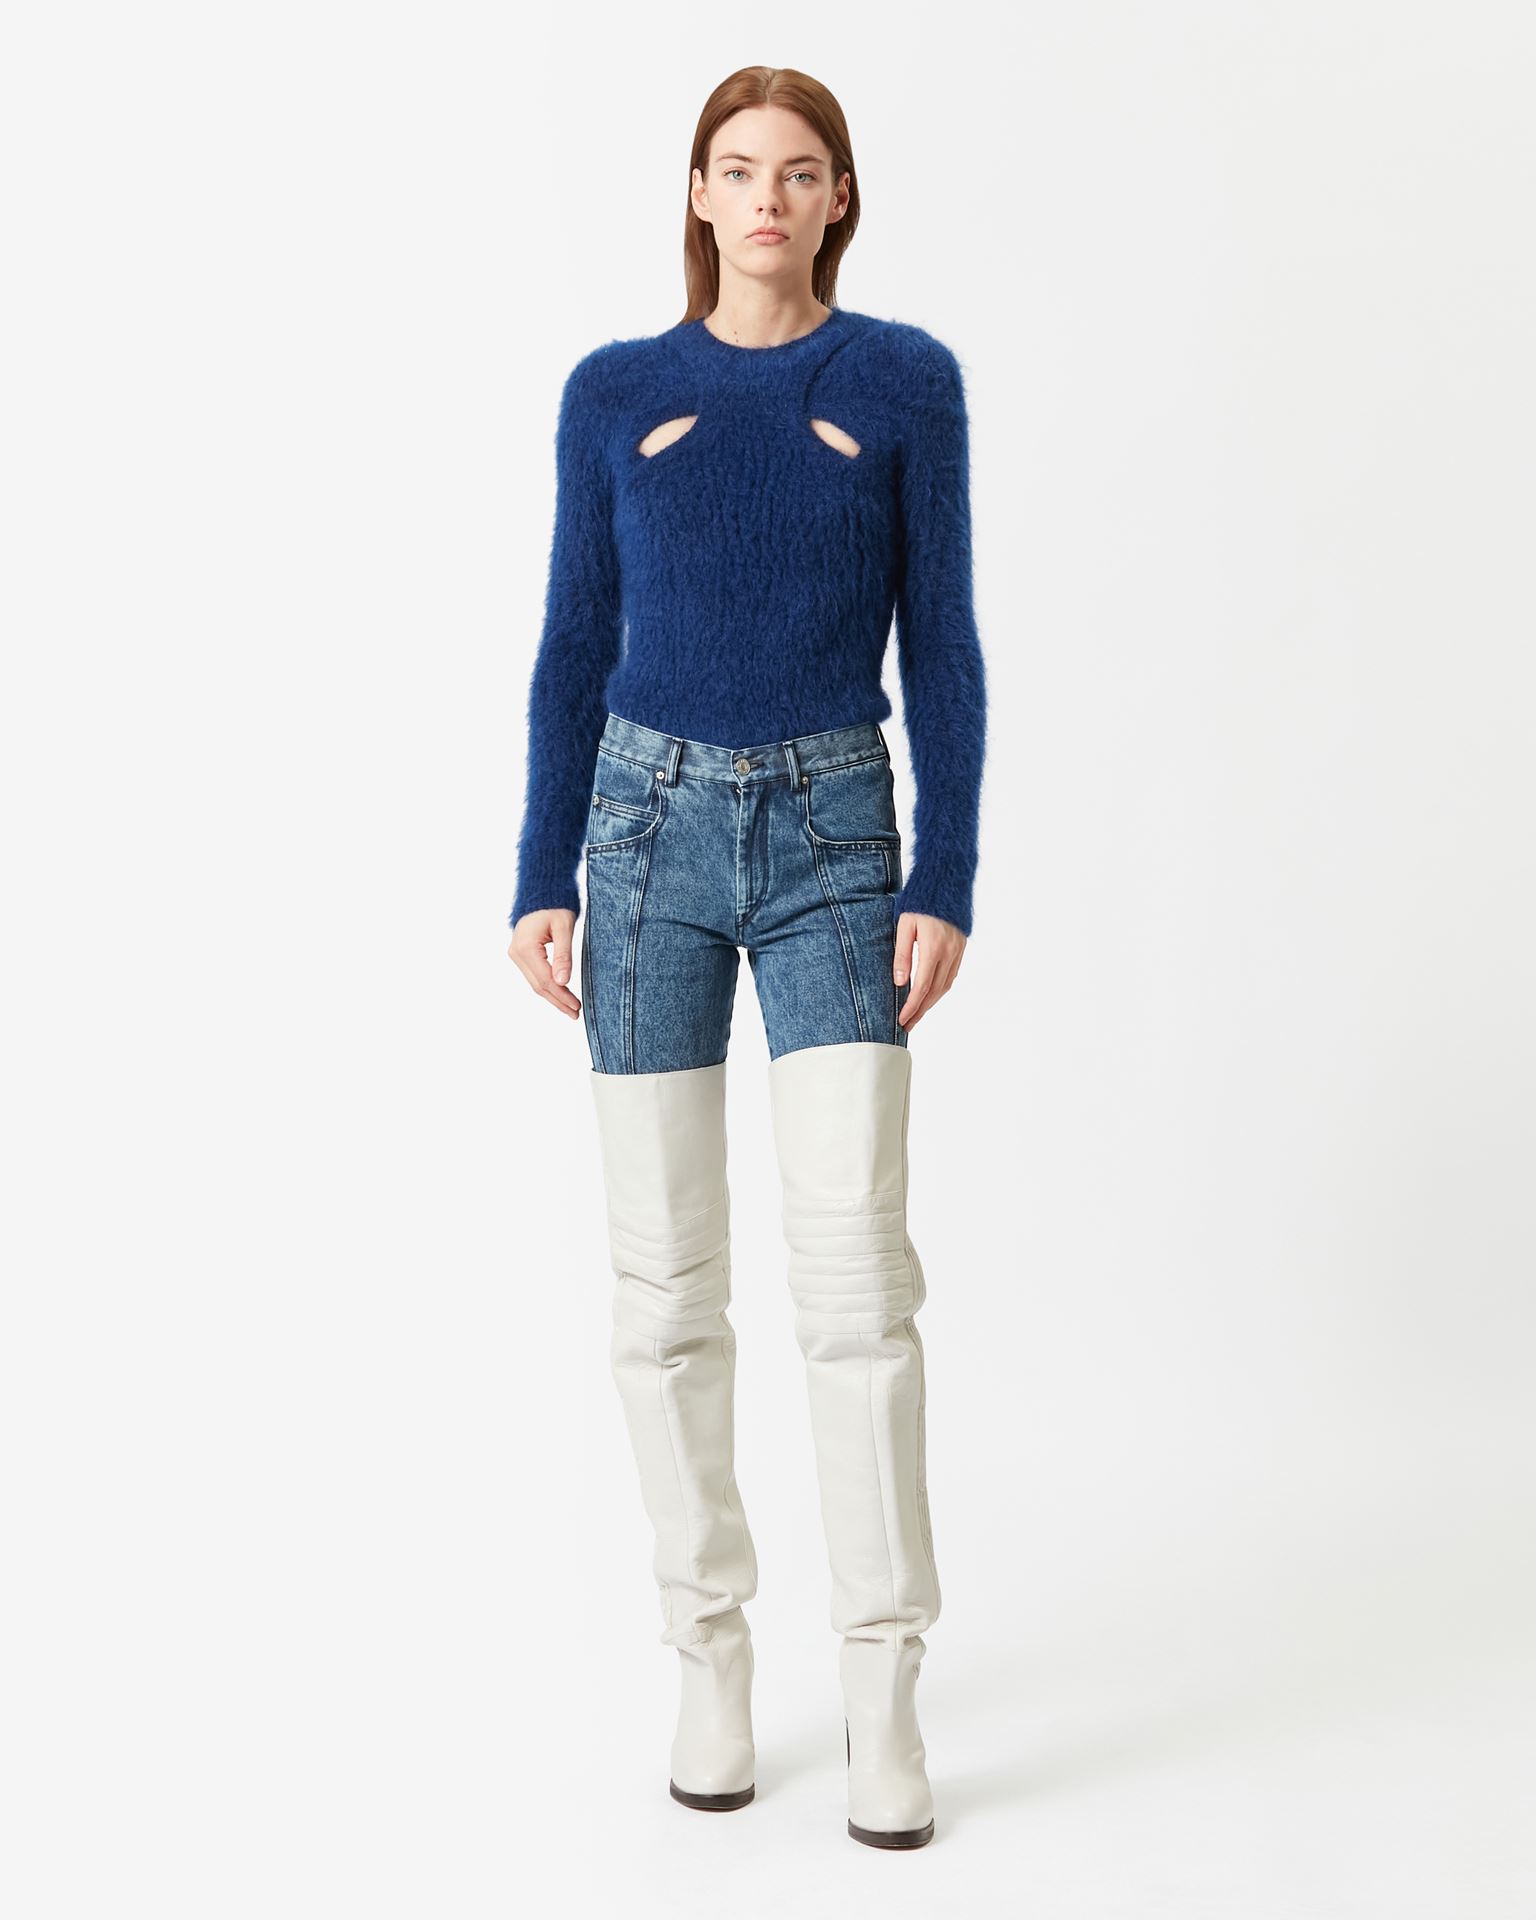 Isabel Marant, Alford Mohair Sweater - Women - Blue